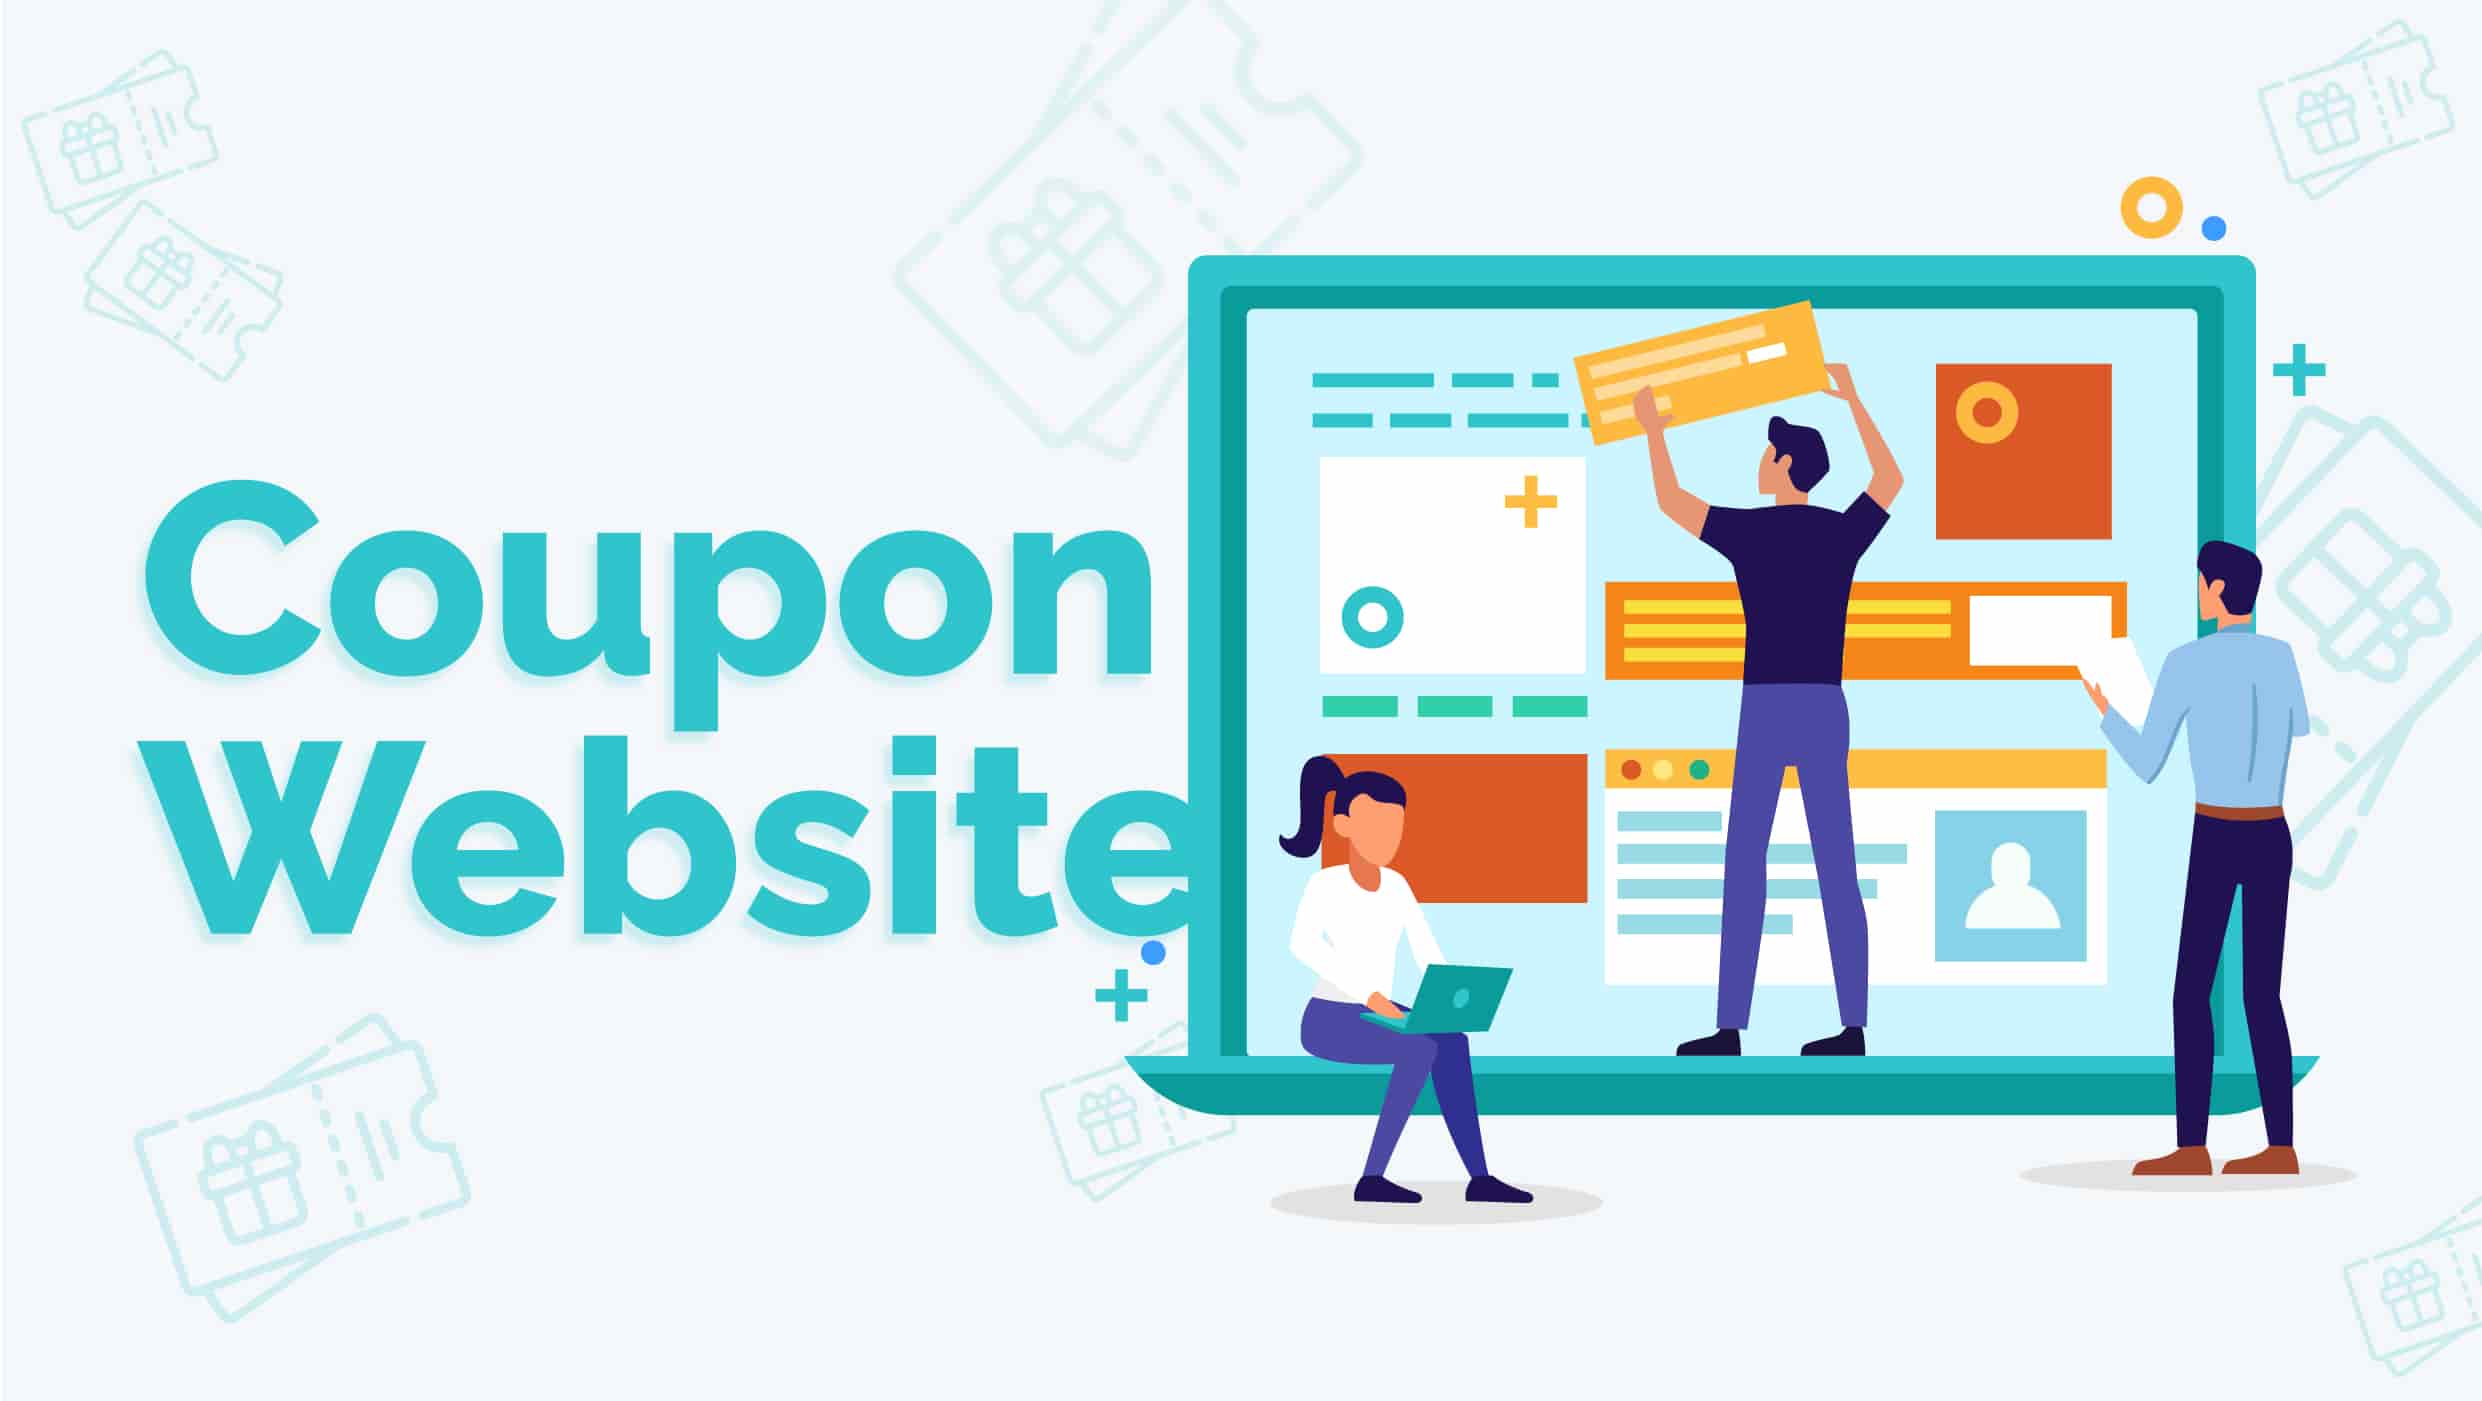 How to Start a Coupon Website?